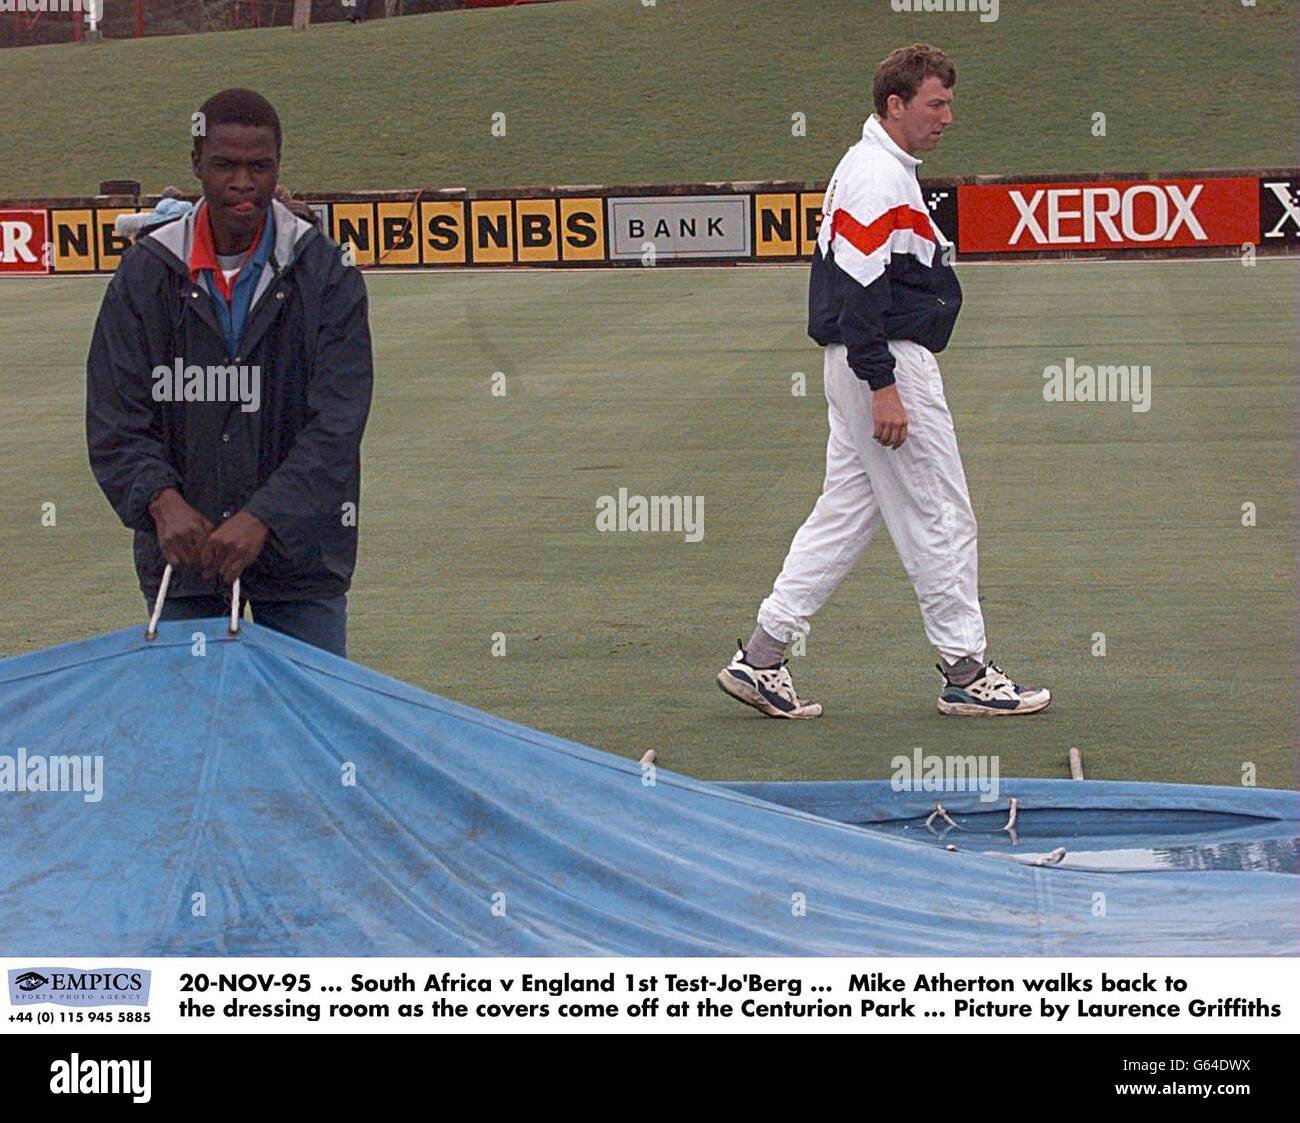 20-NOV-95. South Africa v England 1st Test-Jo'Berg. Mike Atherton walks back to the dressing room as the covers come off at the Centurion Park. Picture by Laurence Griffiths Stock Photo